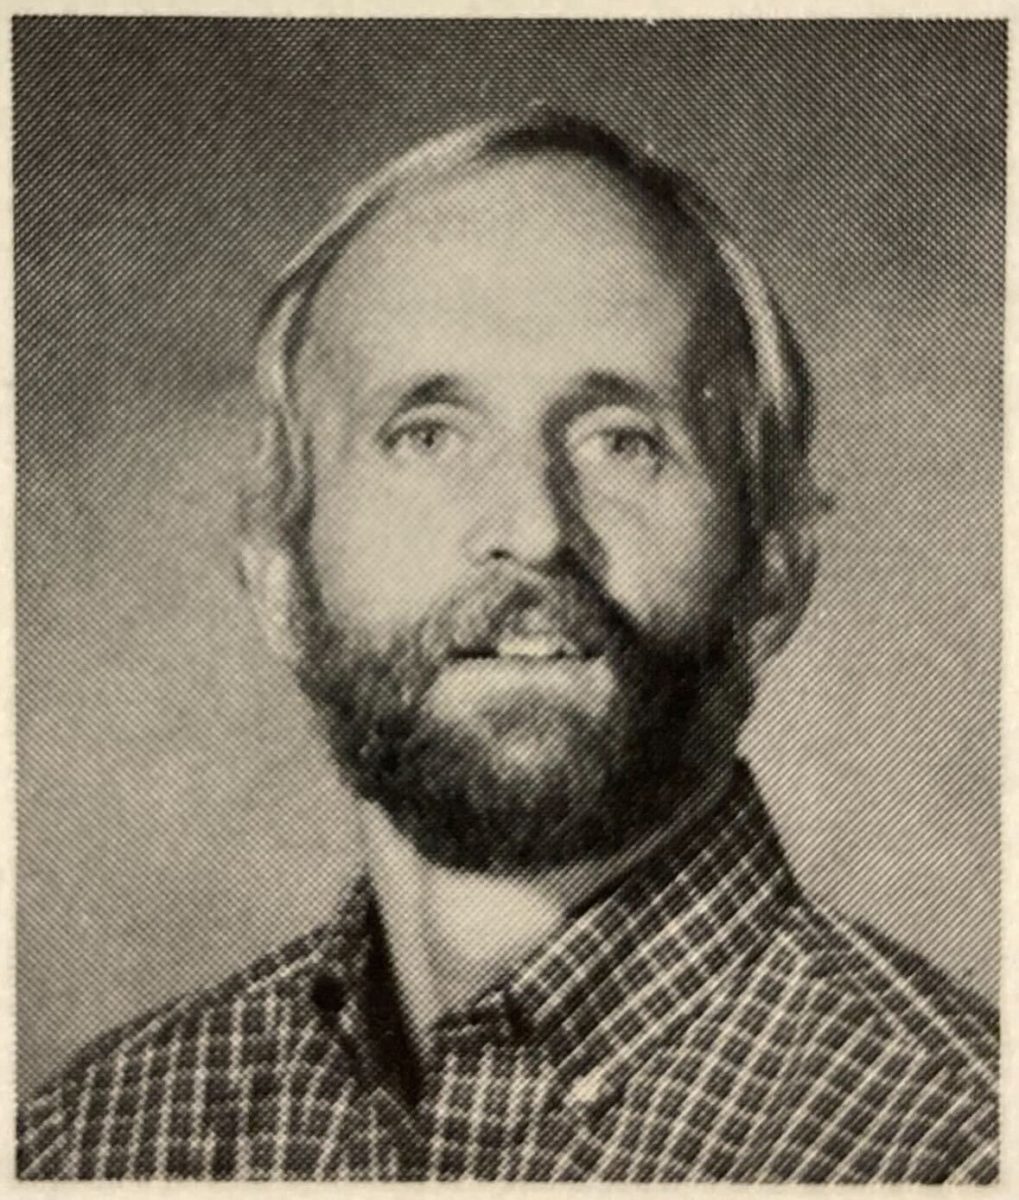 Smiling for his first photo in the yearbook, Mr. Kristan gets ready for his first year at Westwood. Mr Kristan served to be an influential and talented educator for more than 51 years.